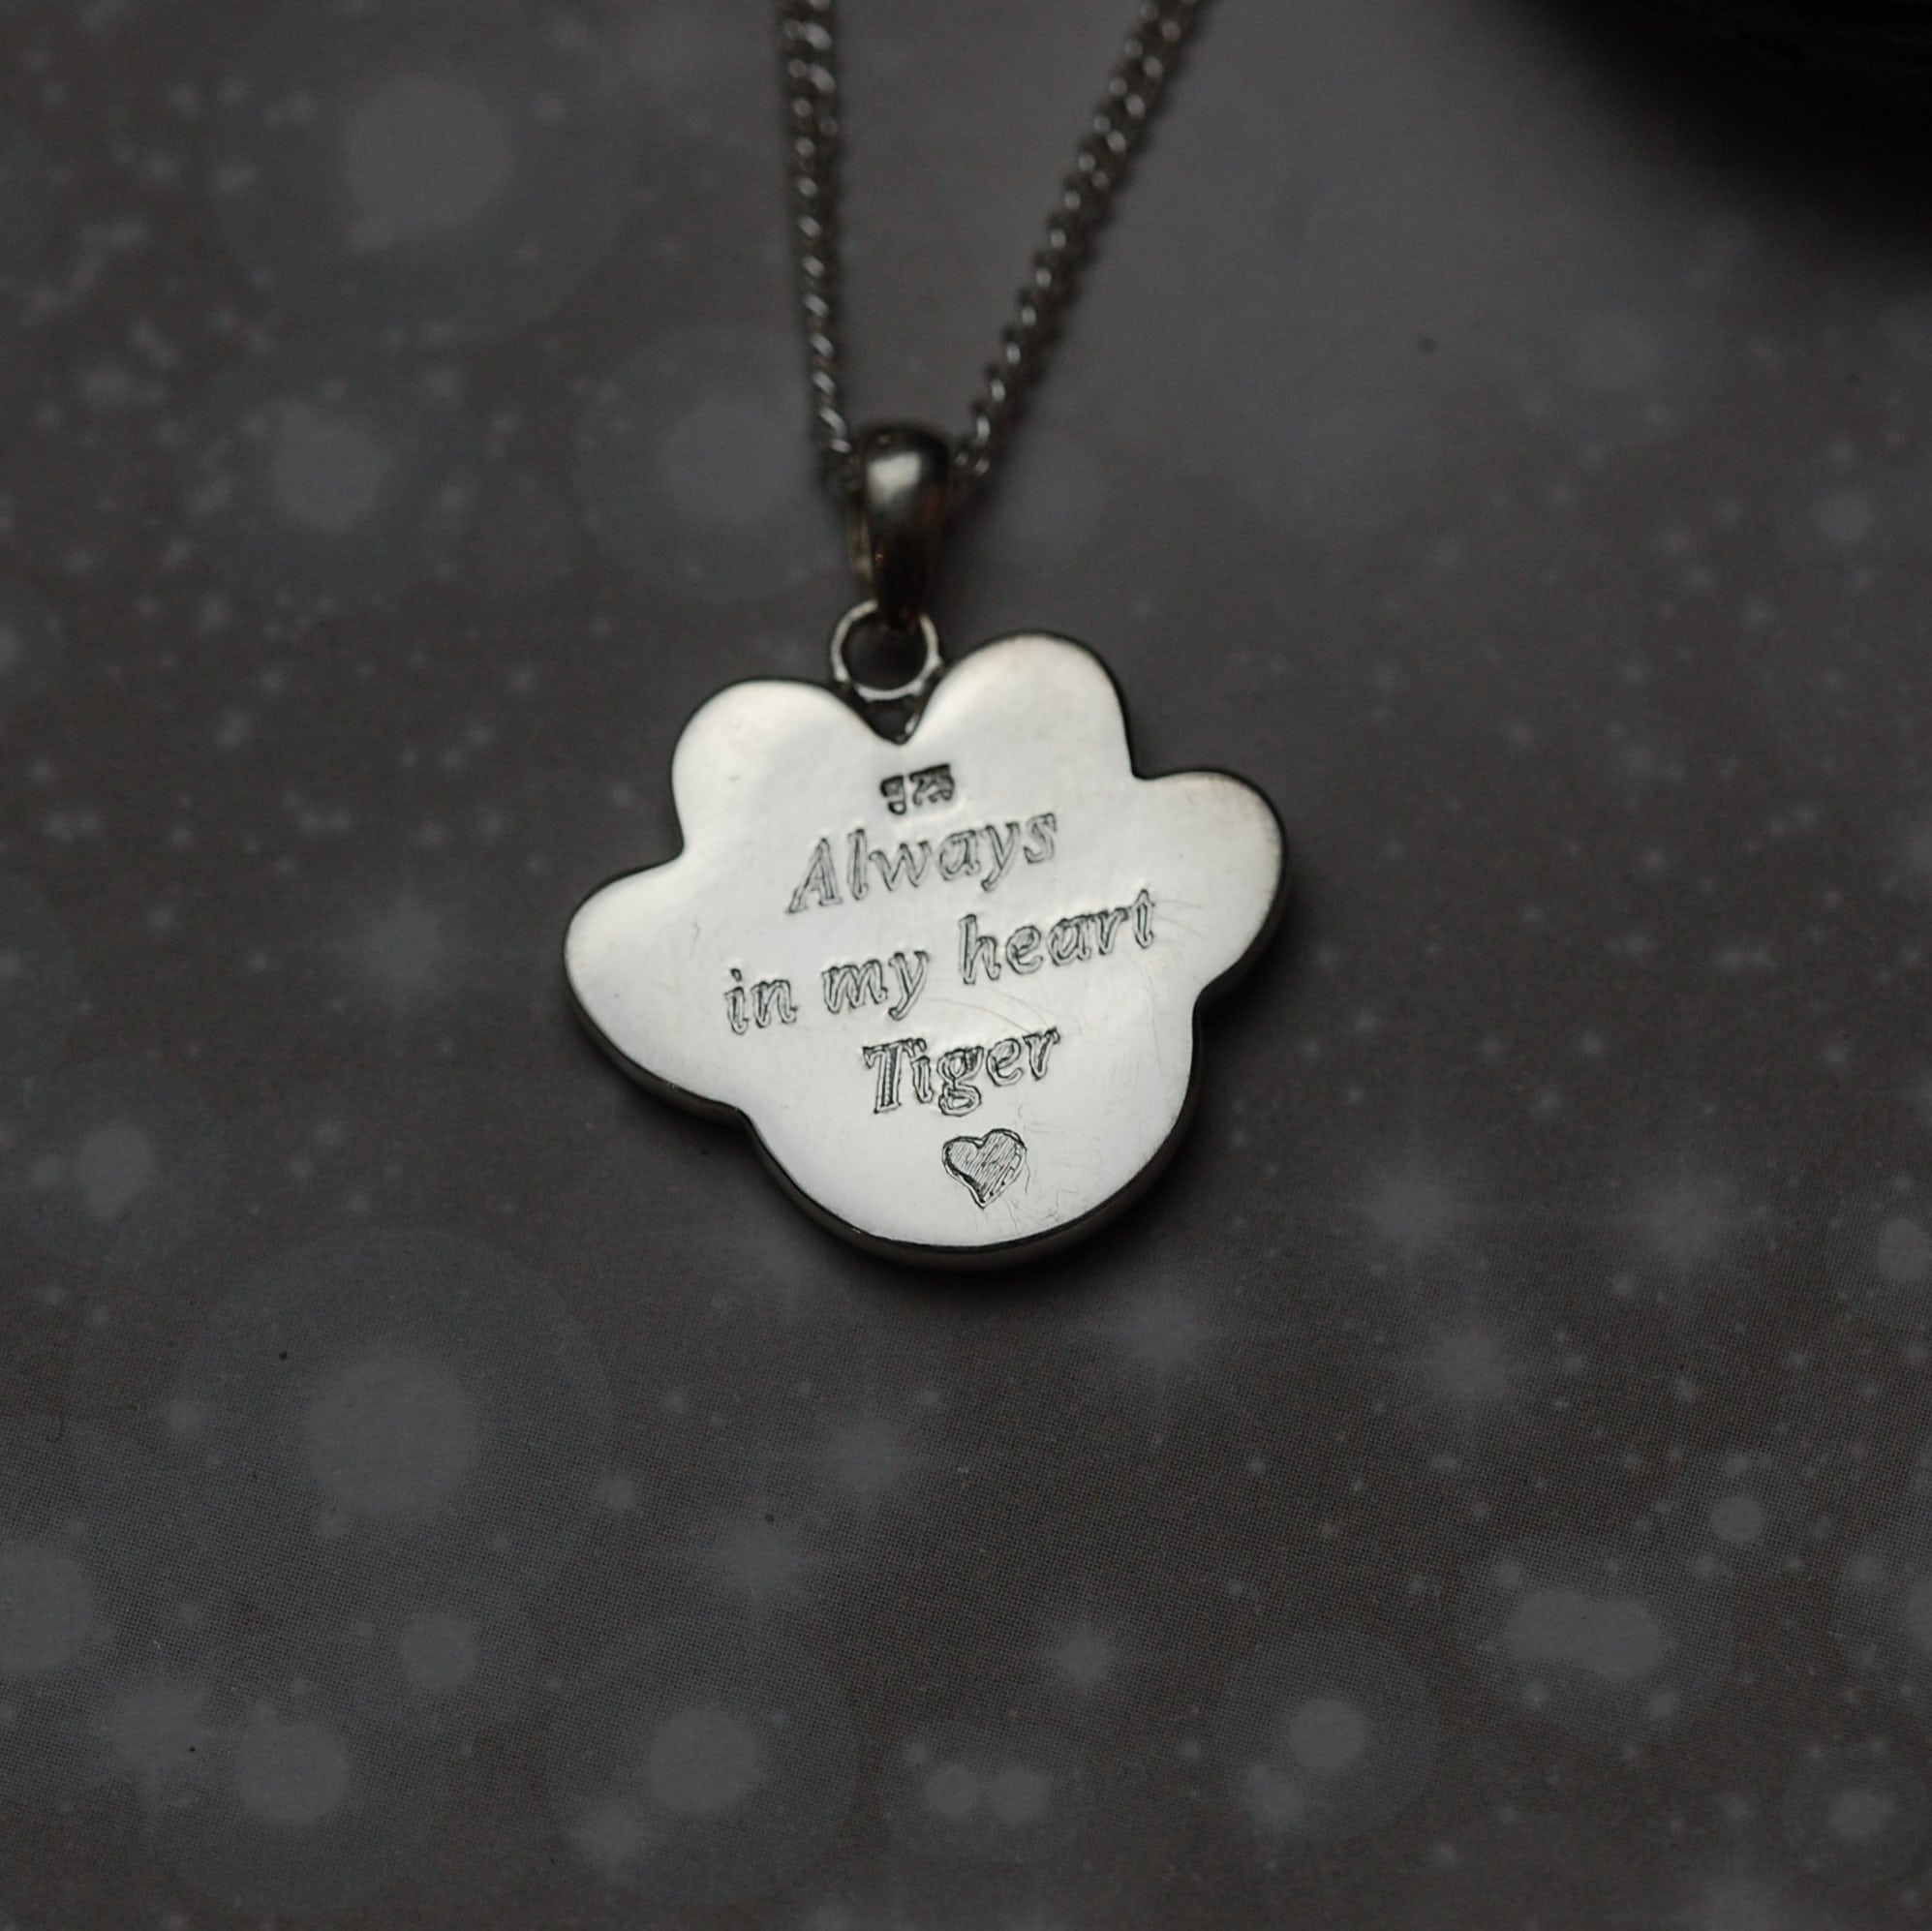 Pet name and message engraved on silver paw print pendant with pet fur or cremation ashes